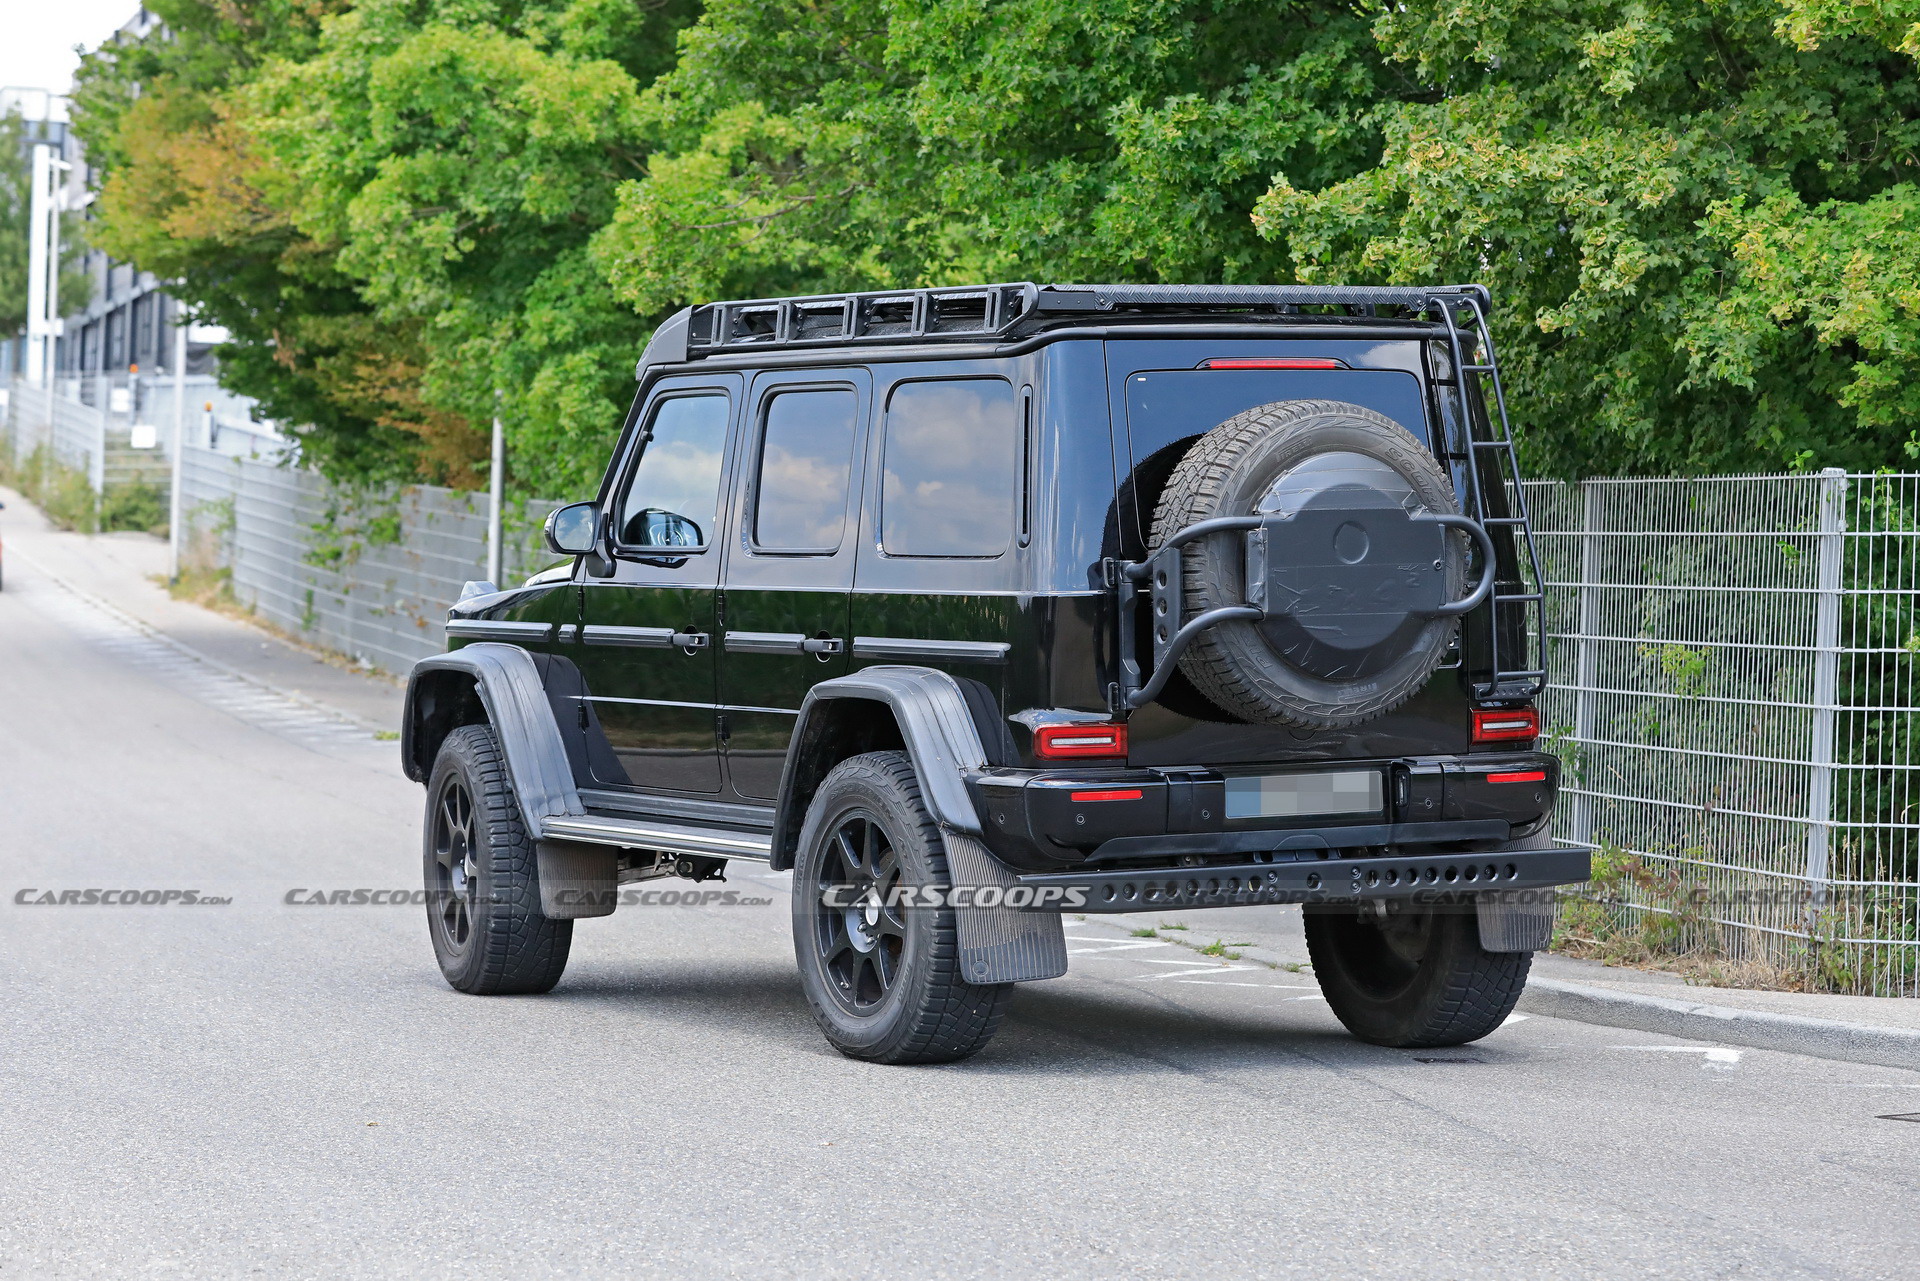 21 Mercedes Amg G Class 4x4 Spied Undisguised Looks Every Bit As Wild As The Original Carscoops